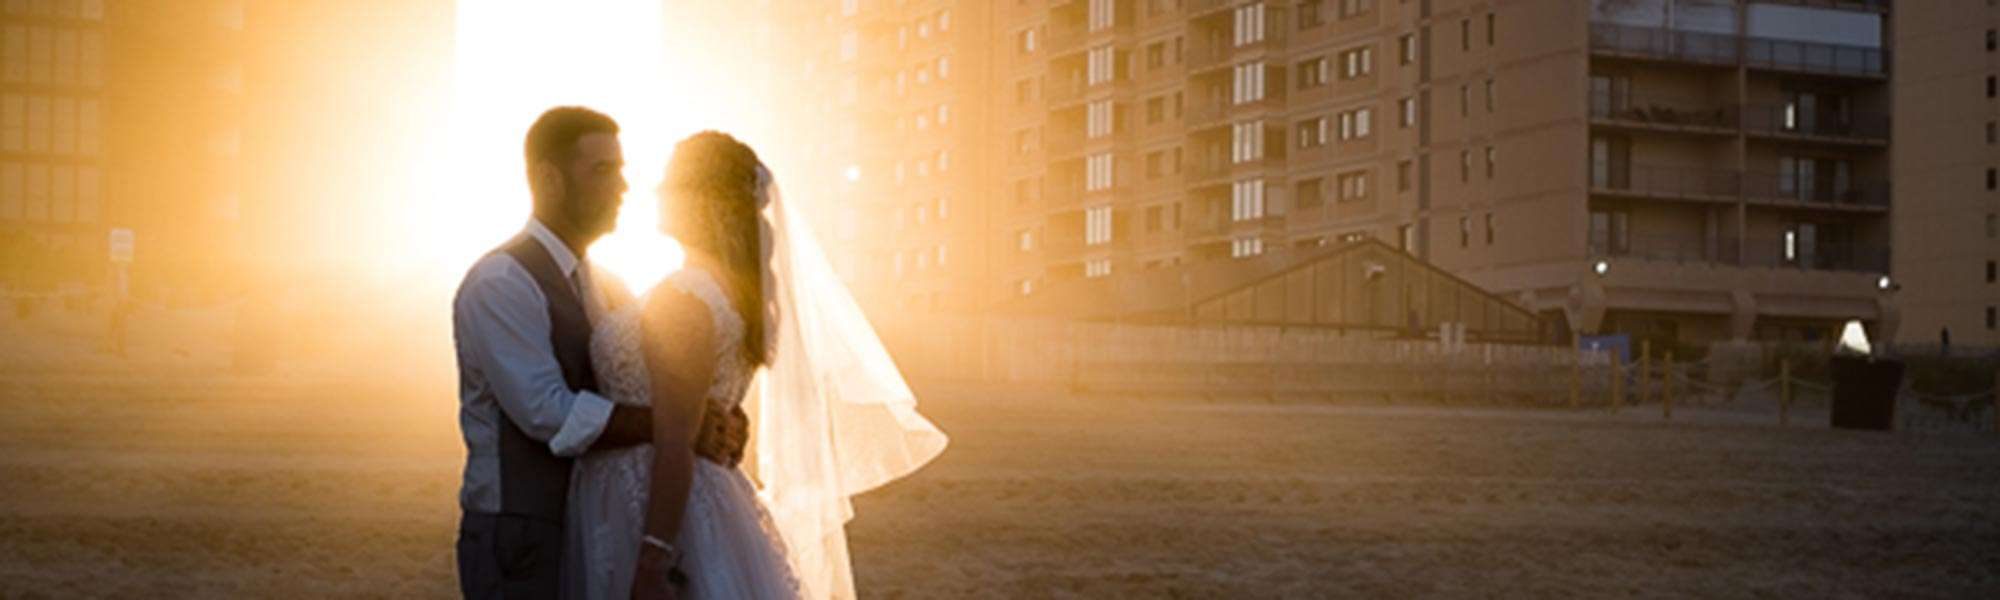 Trends in Wedding Photography